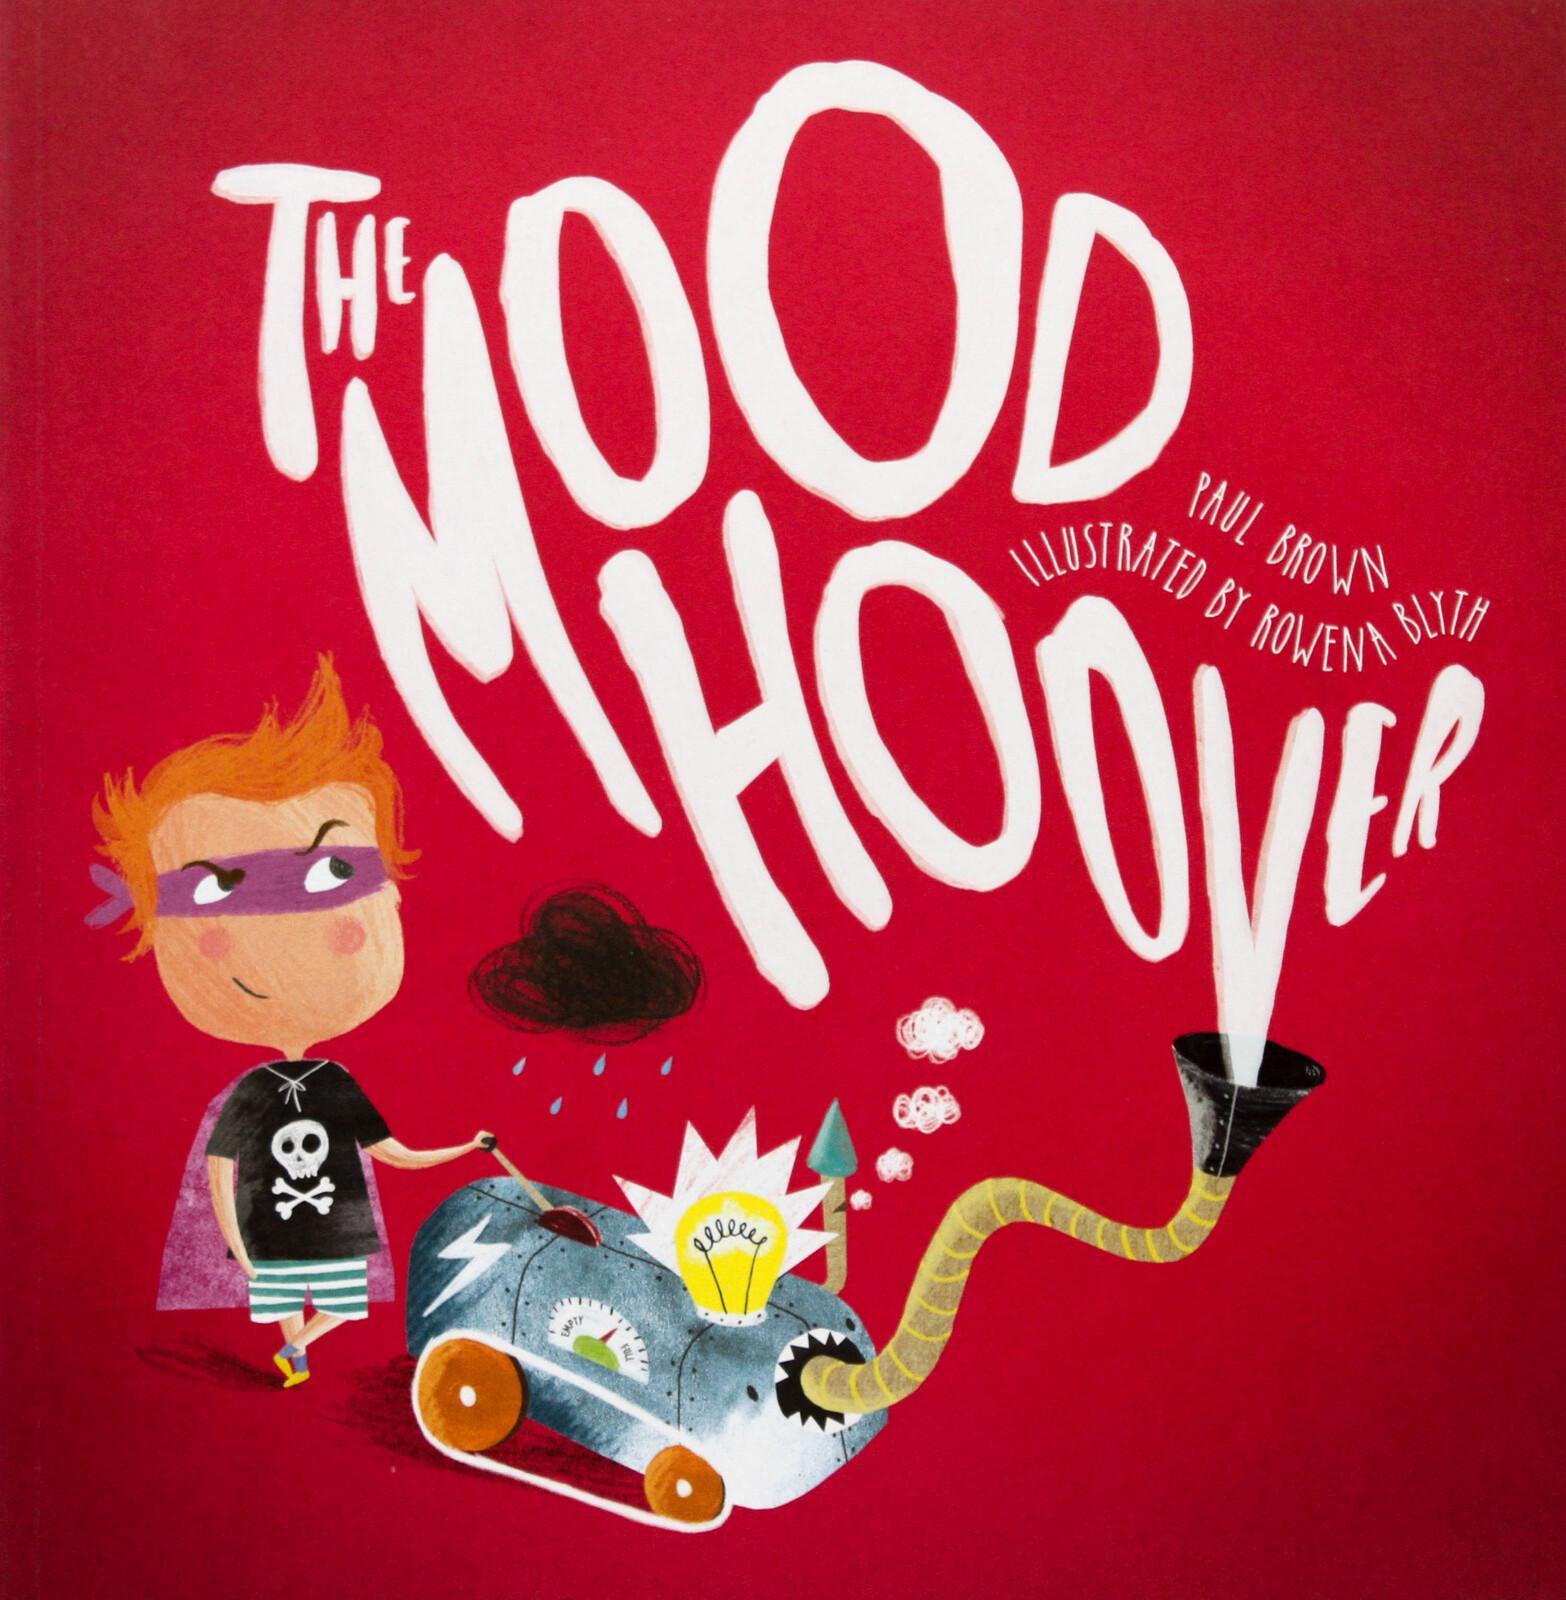 The Mood Hoover -Rowena Blyth Paul Brown Paperback Children's Book